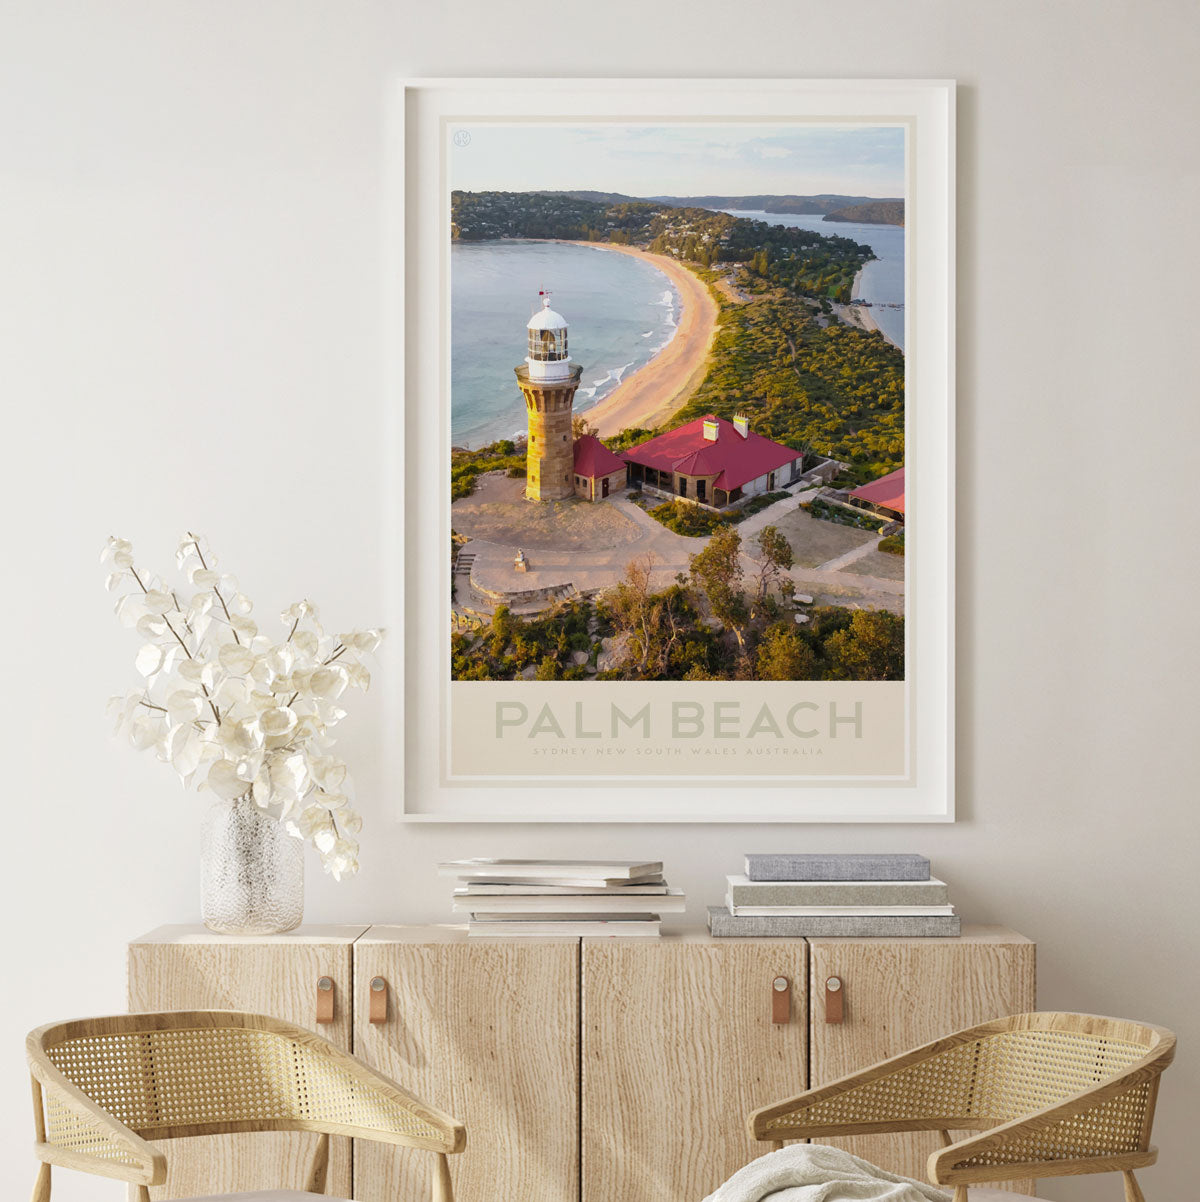 Palm Beach retro vintage travel poster from Places We Luv